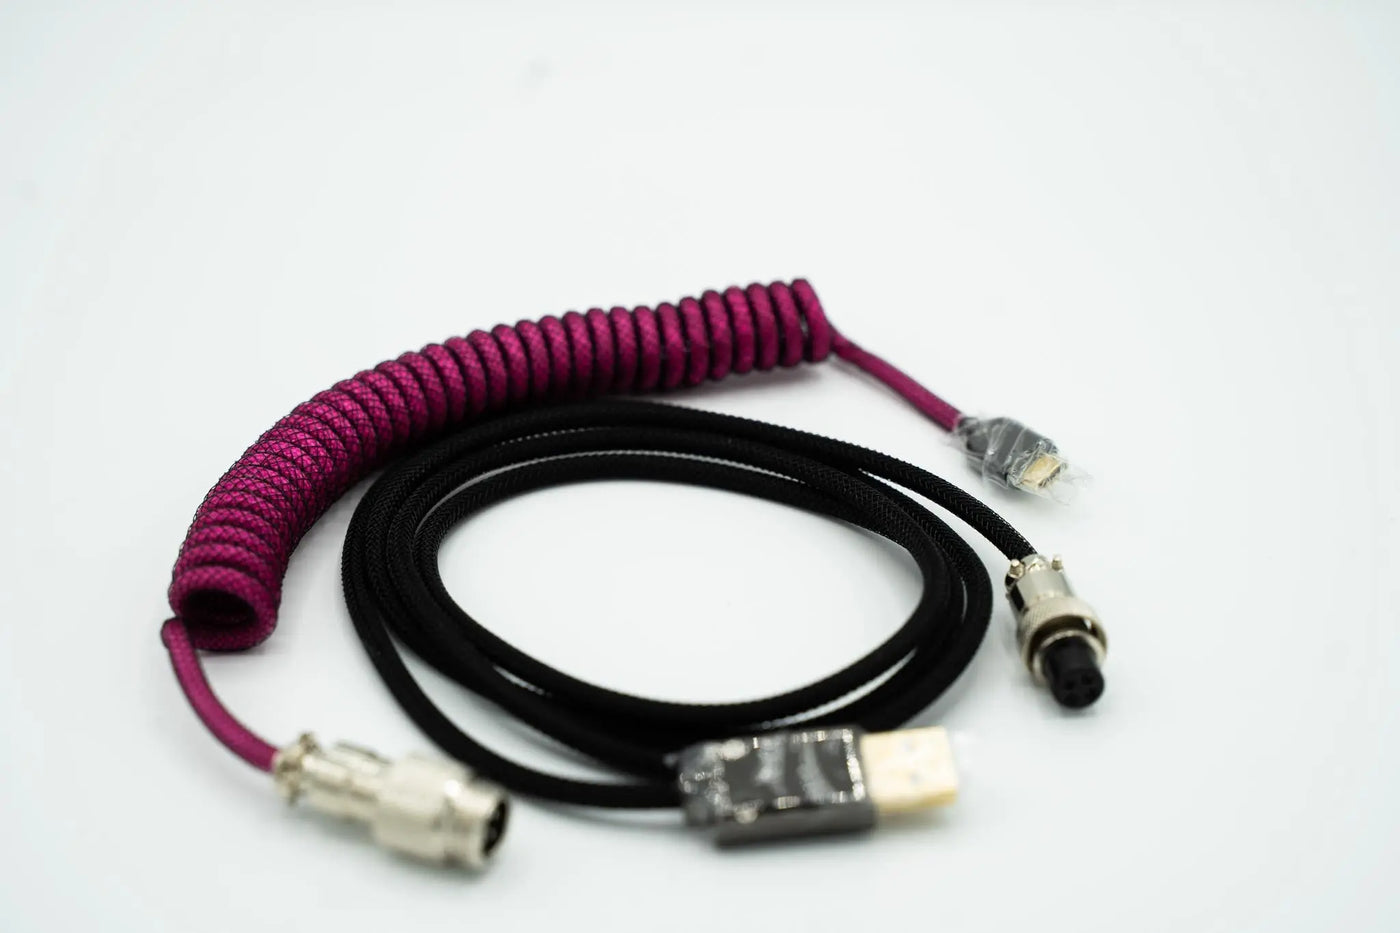 Black and Pink Custom Coiled Type C USB Cable for Keyboard Vyral